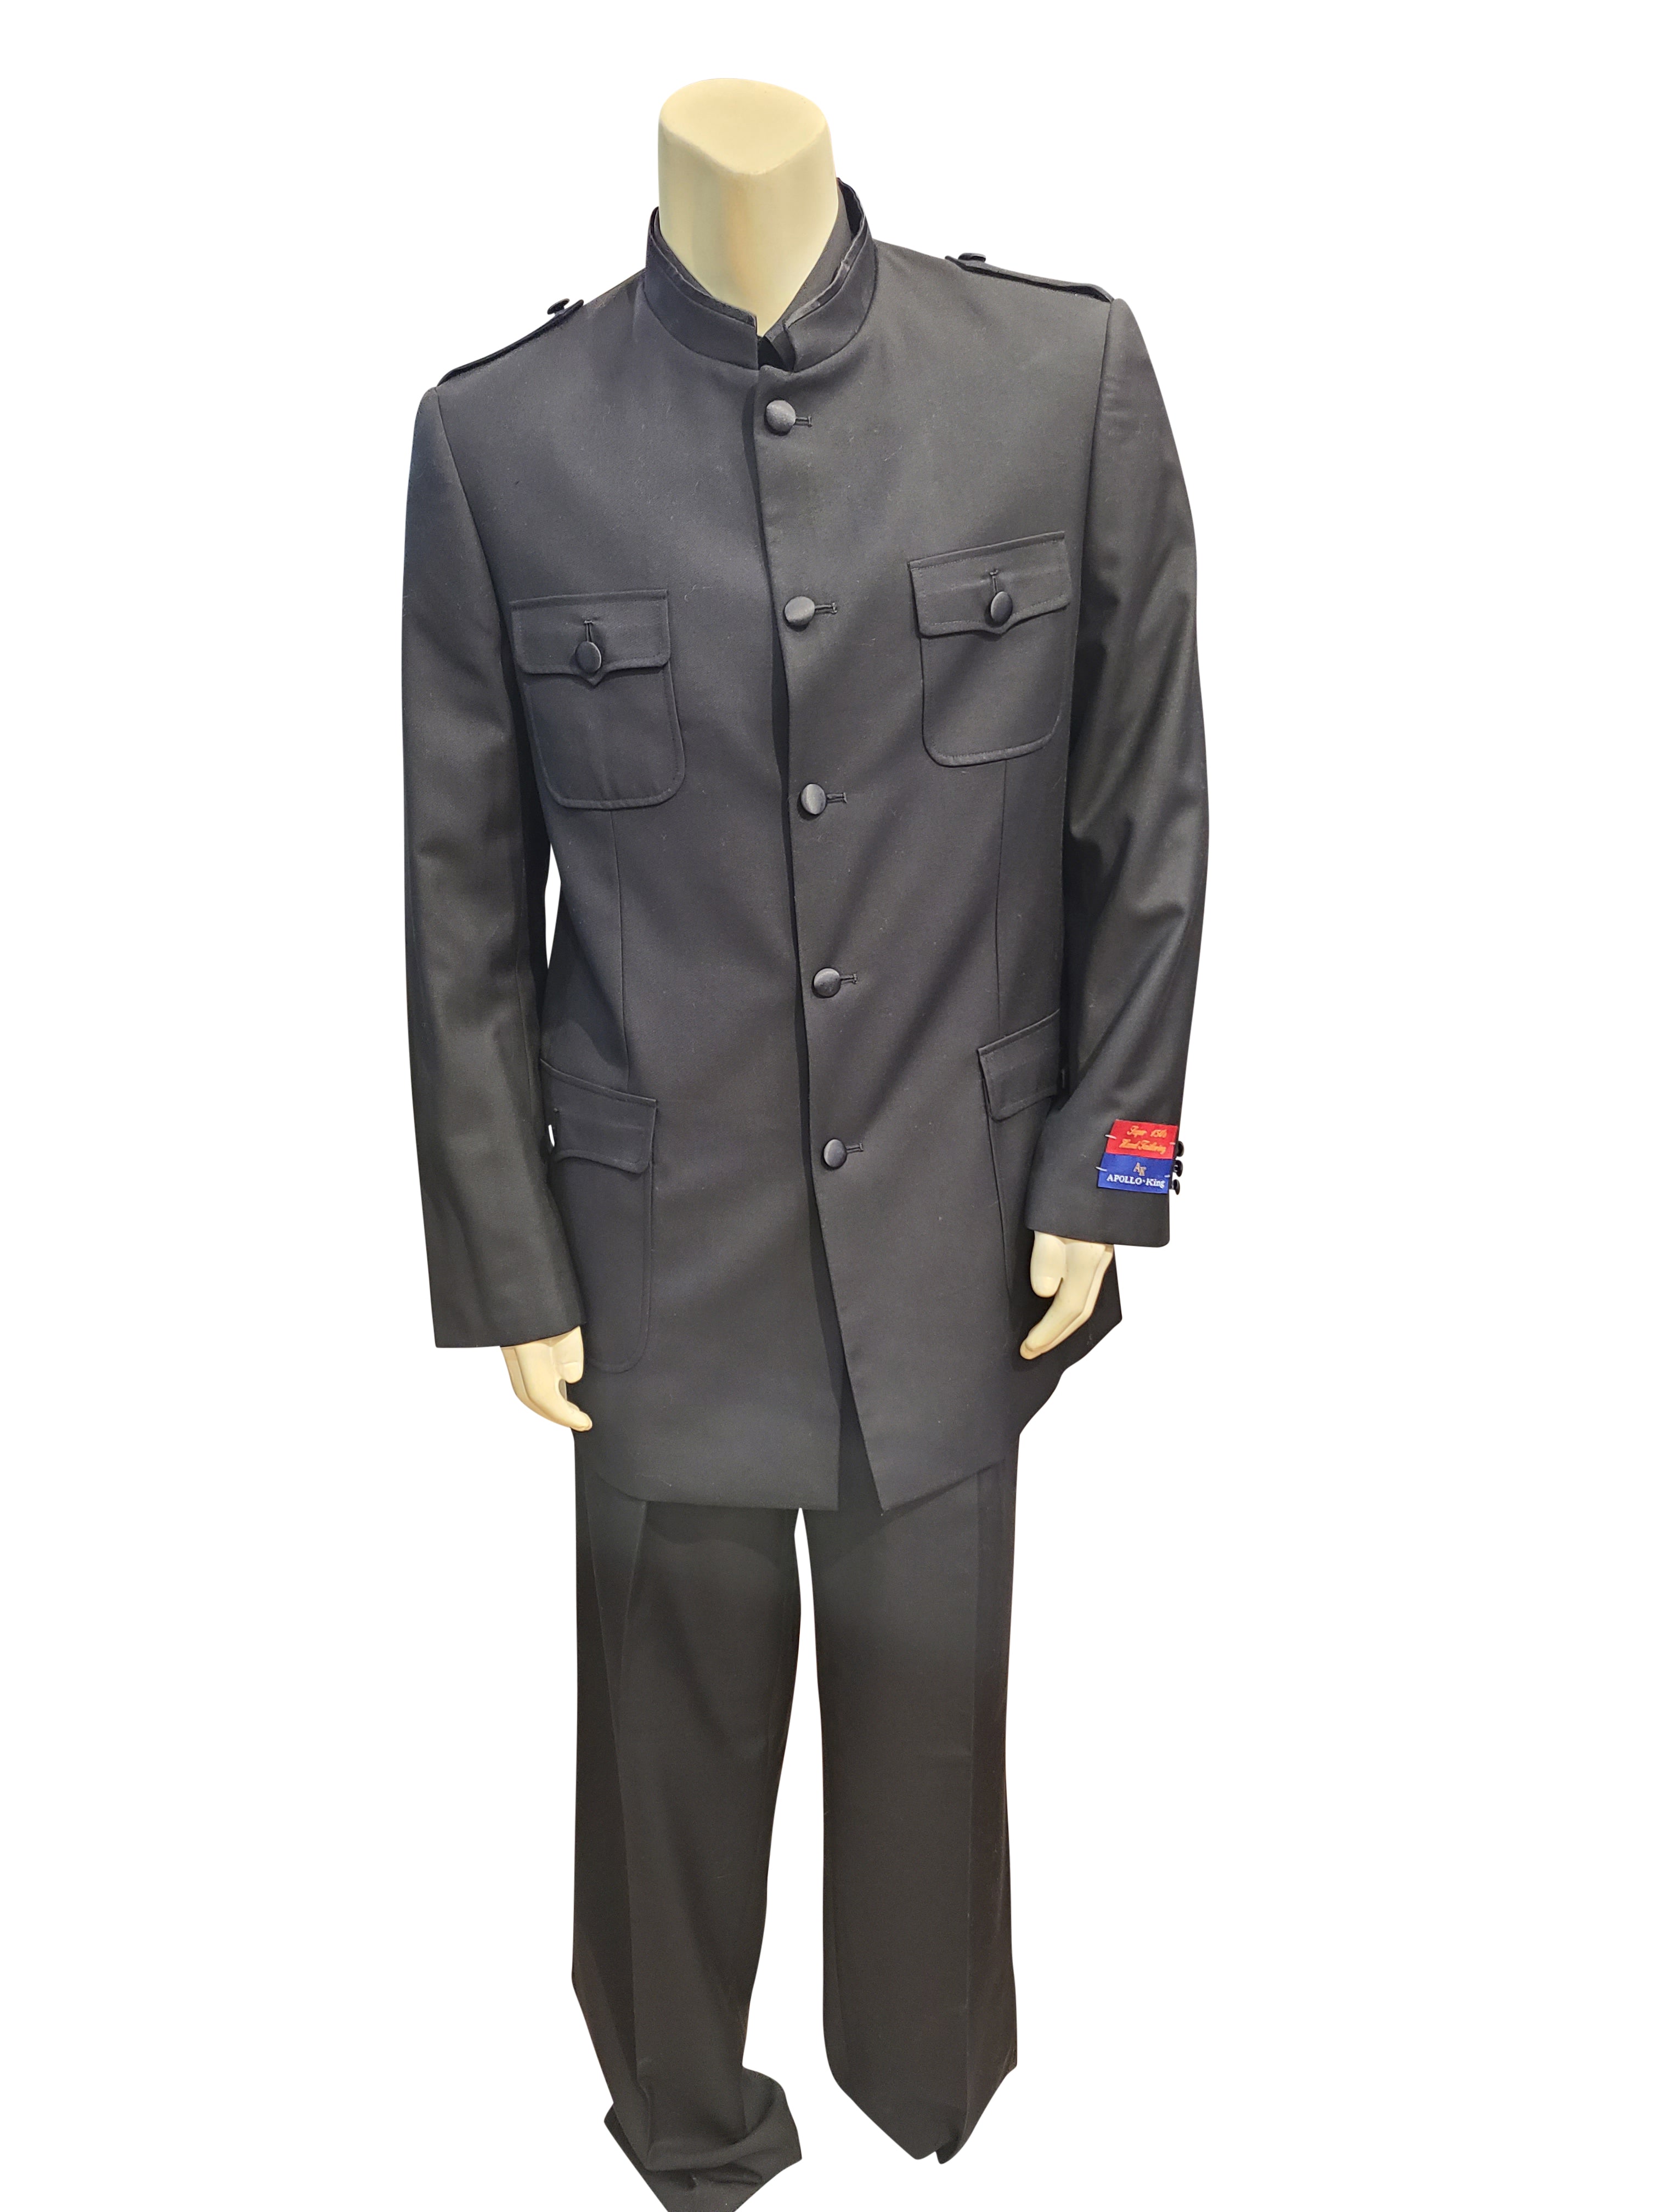 Apollo King Banded Collar Suit